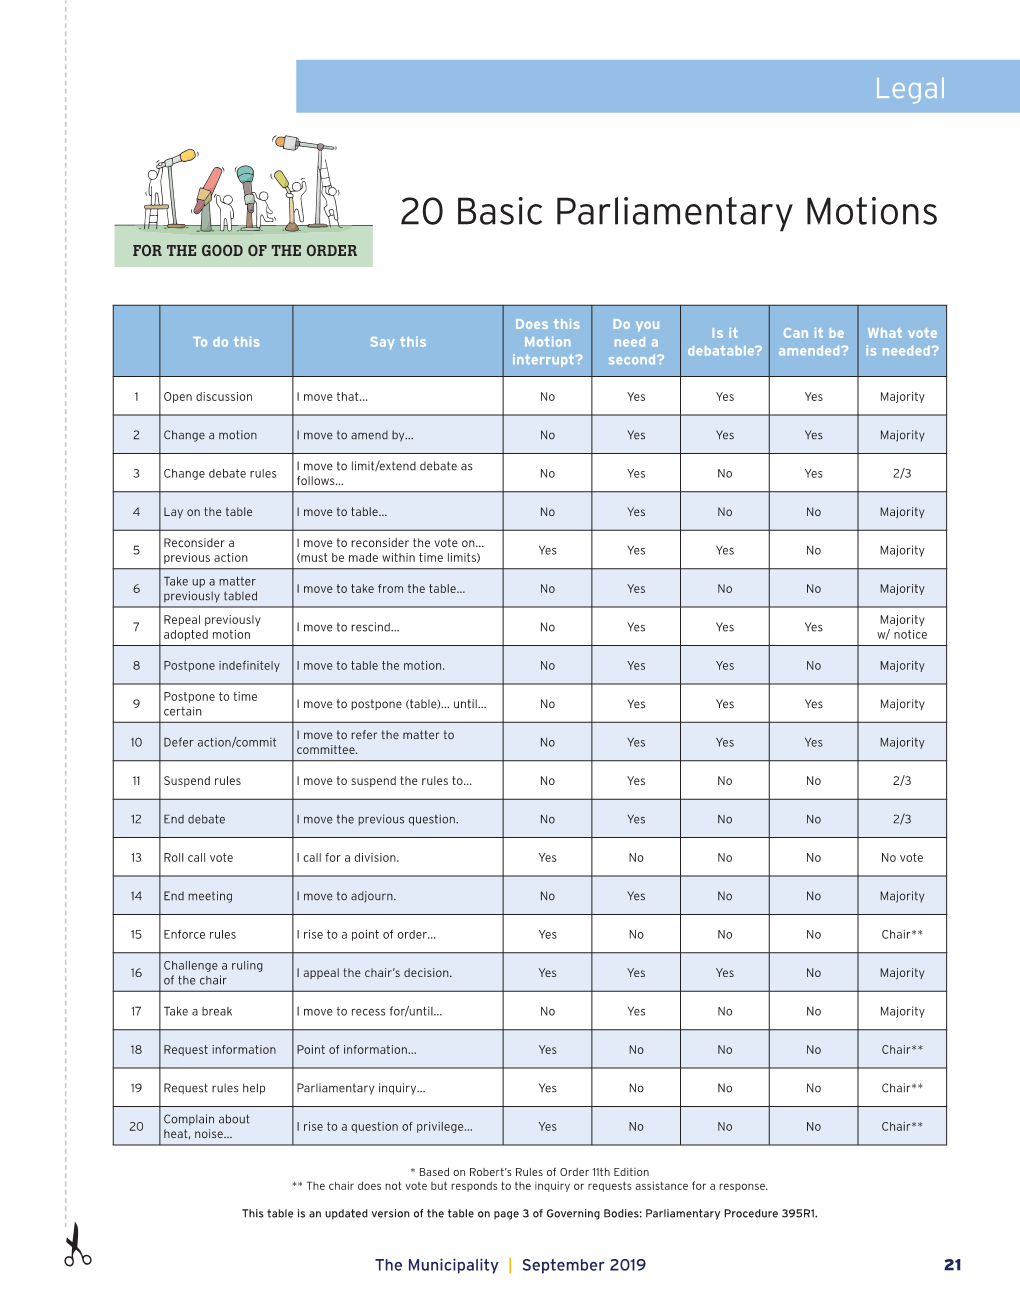 20 Basic Parliamentary Motions for the GOOD of the ORDER